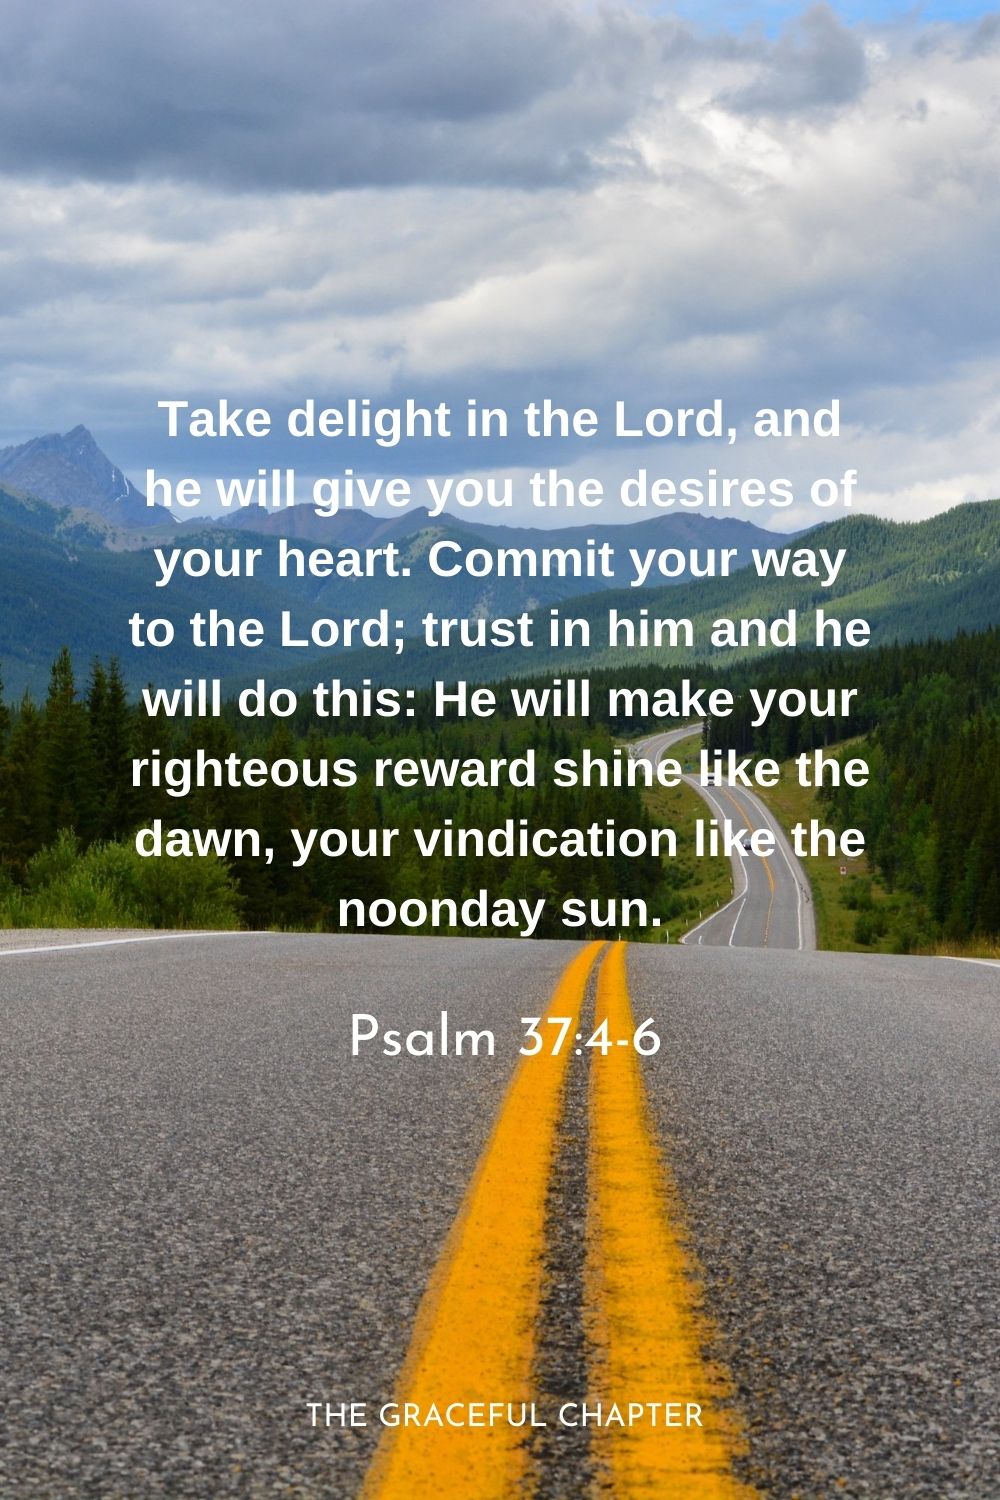 Take delight in the Lord, and he will give you the desires of your heart. Commit your way to the Lord; trust in him and he will do this: He will make your righteous reward shine like the dawn, your vindication like the noonday sun.